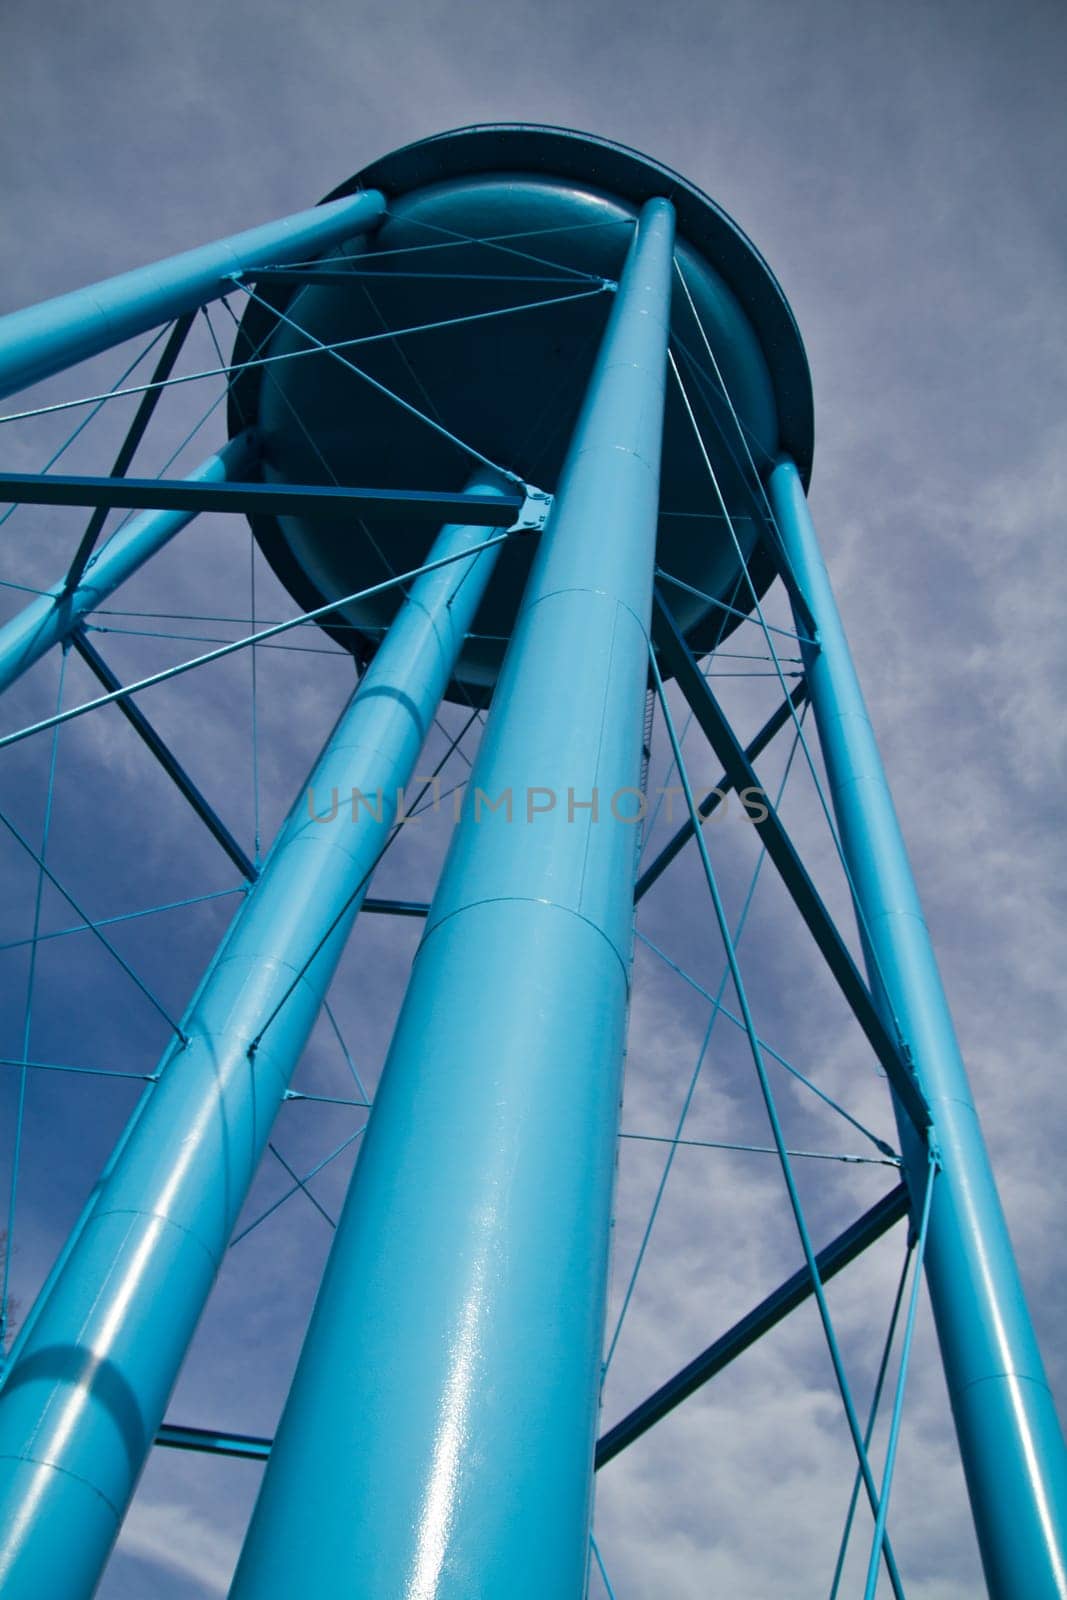 Low Angle View of Blue Water Tower Against Cloudy Sky in Allegan, Michigan by njproductions